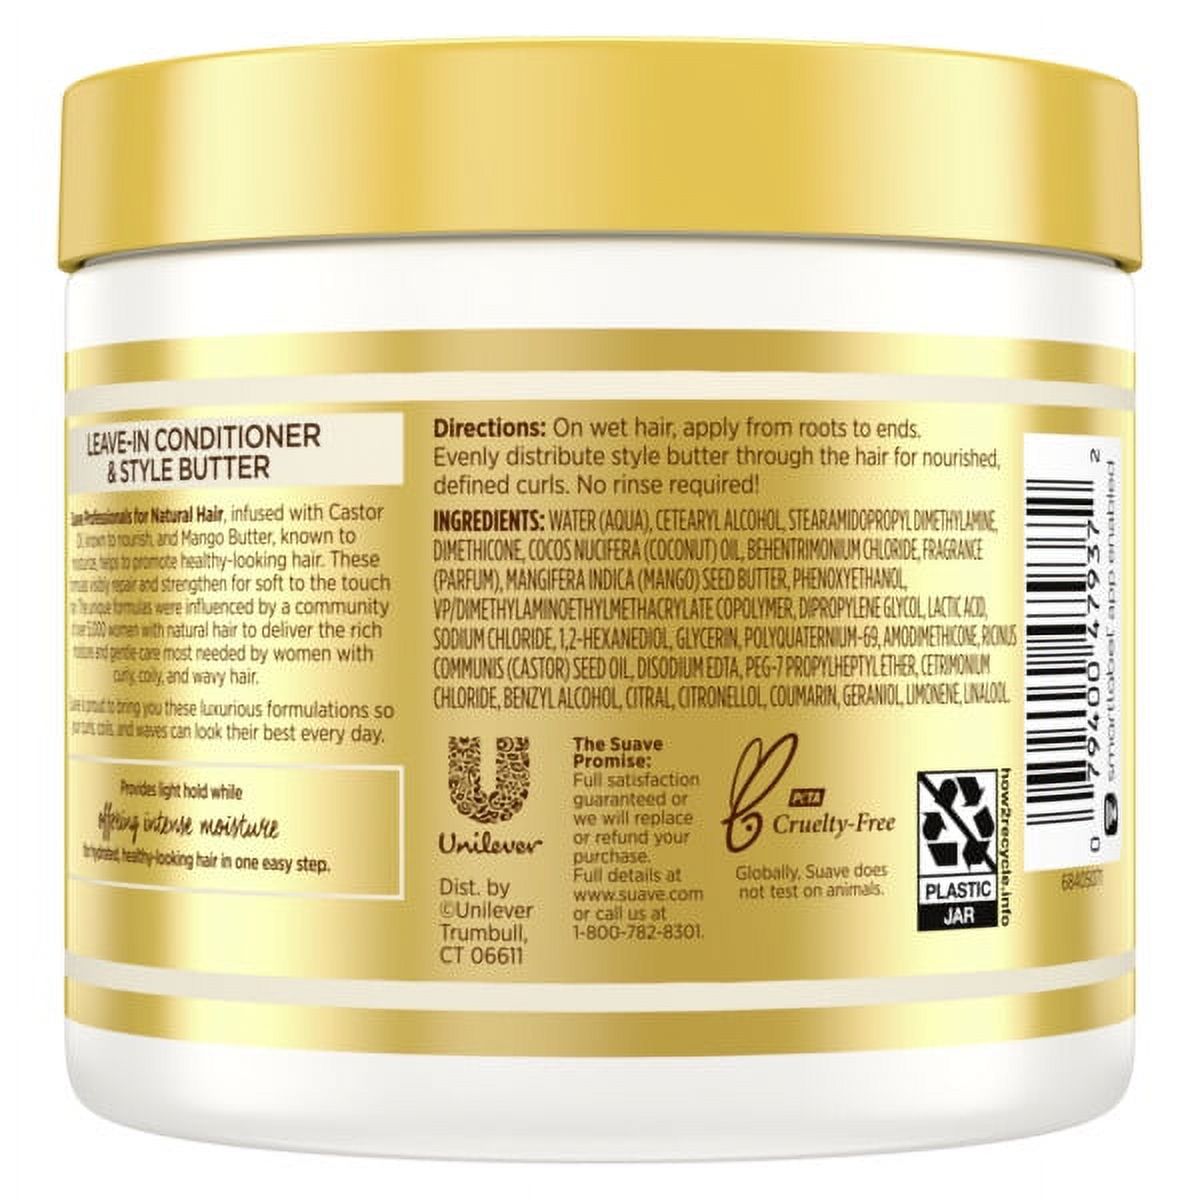 Suave Professionals Moisturizing Thickening Daily Conditioner with Castor Oil & Mango Butter, 13.5 fl oz - image 2 of 6